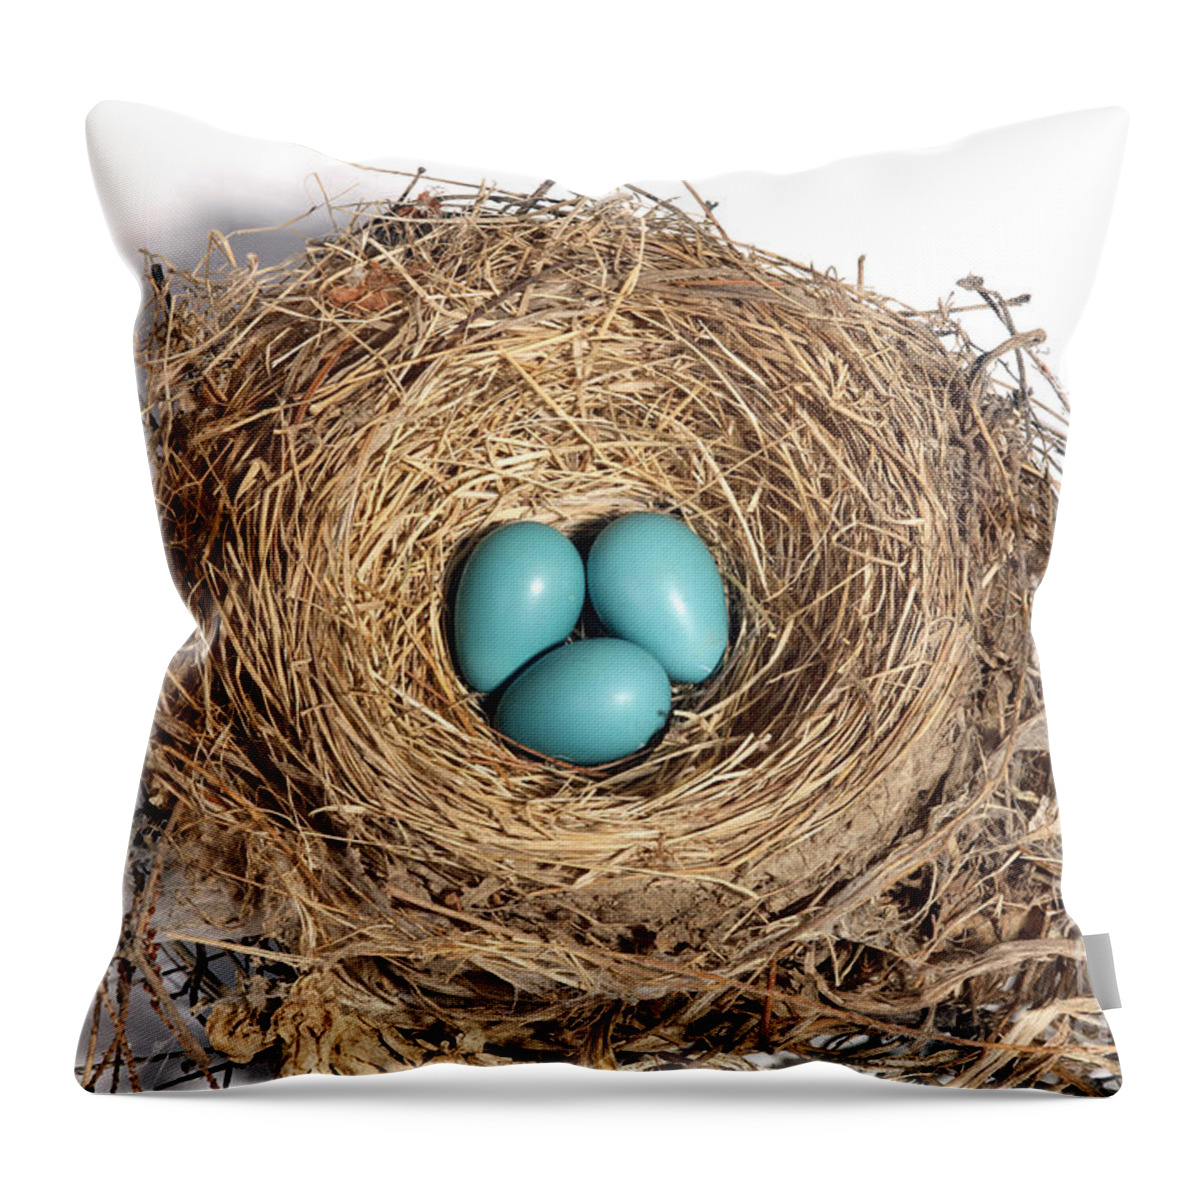 American Robin Throw Pillow featuring the photograph Robins Nest With Eggs by Ted Kinsman